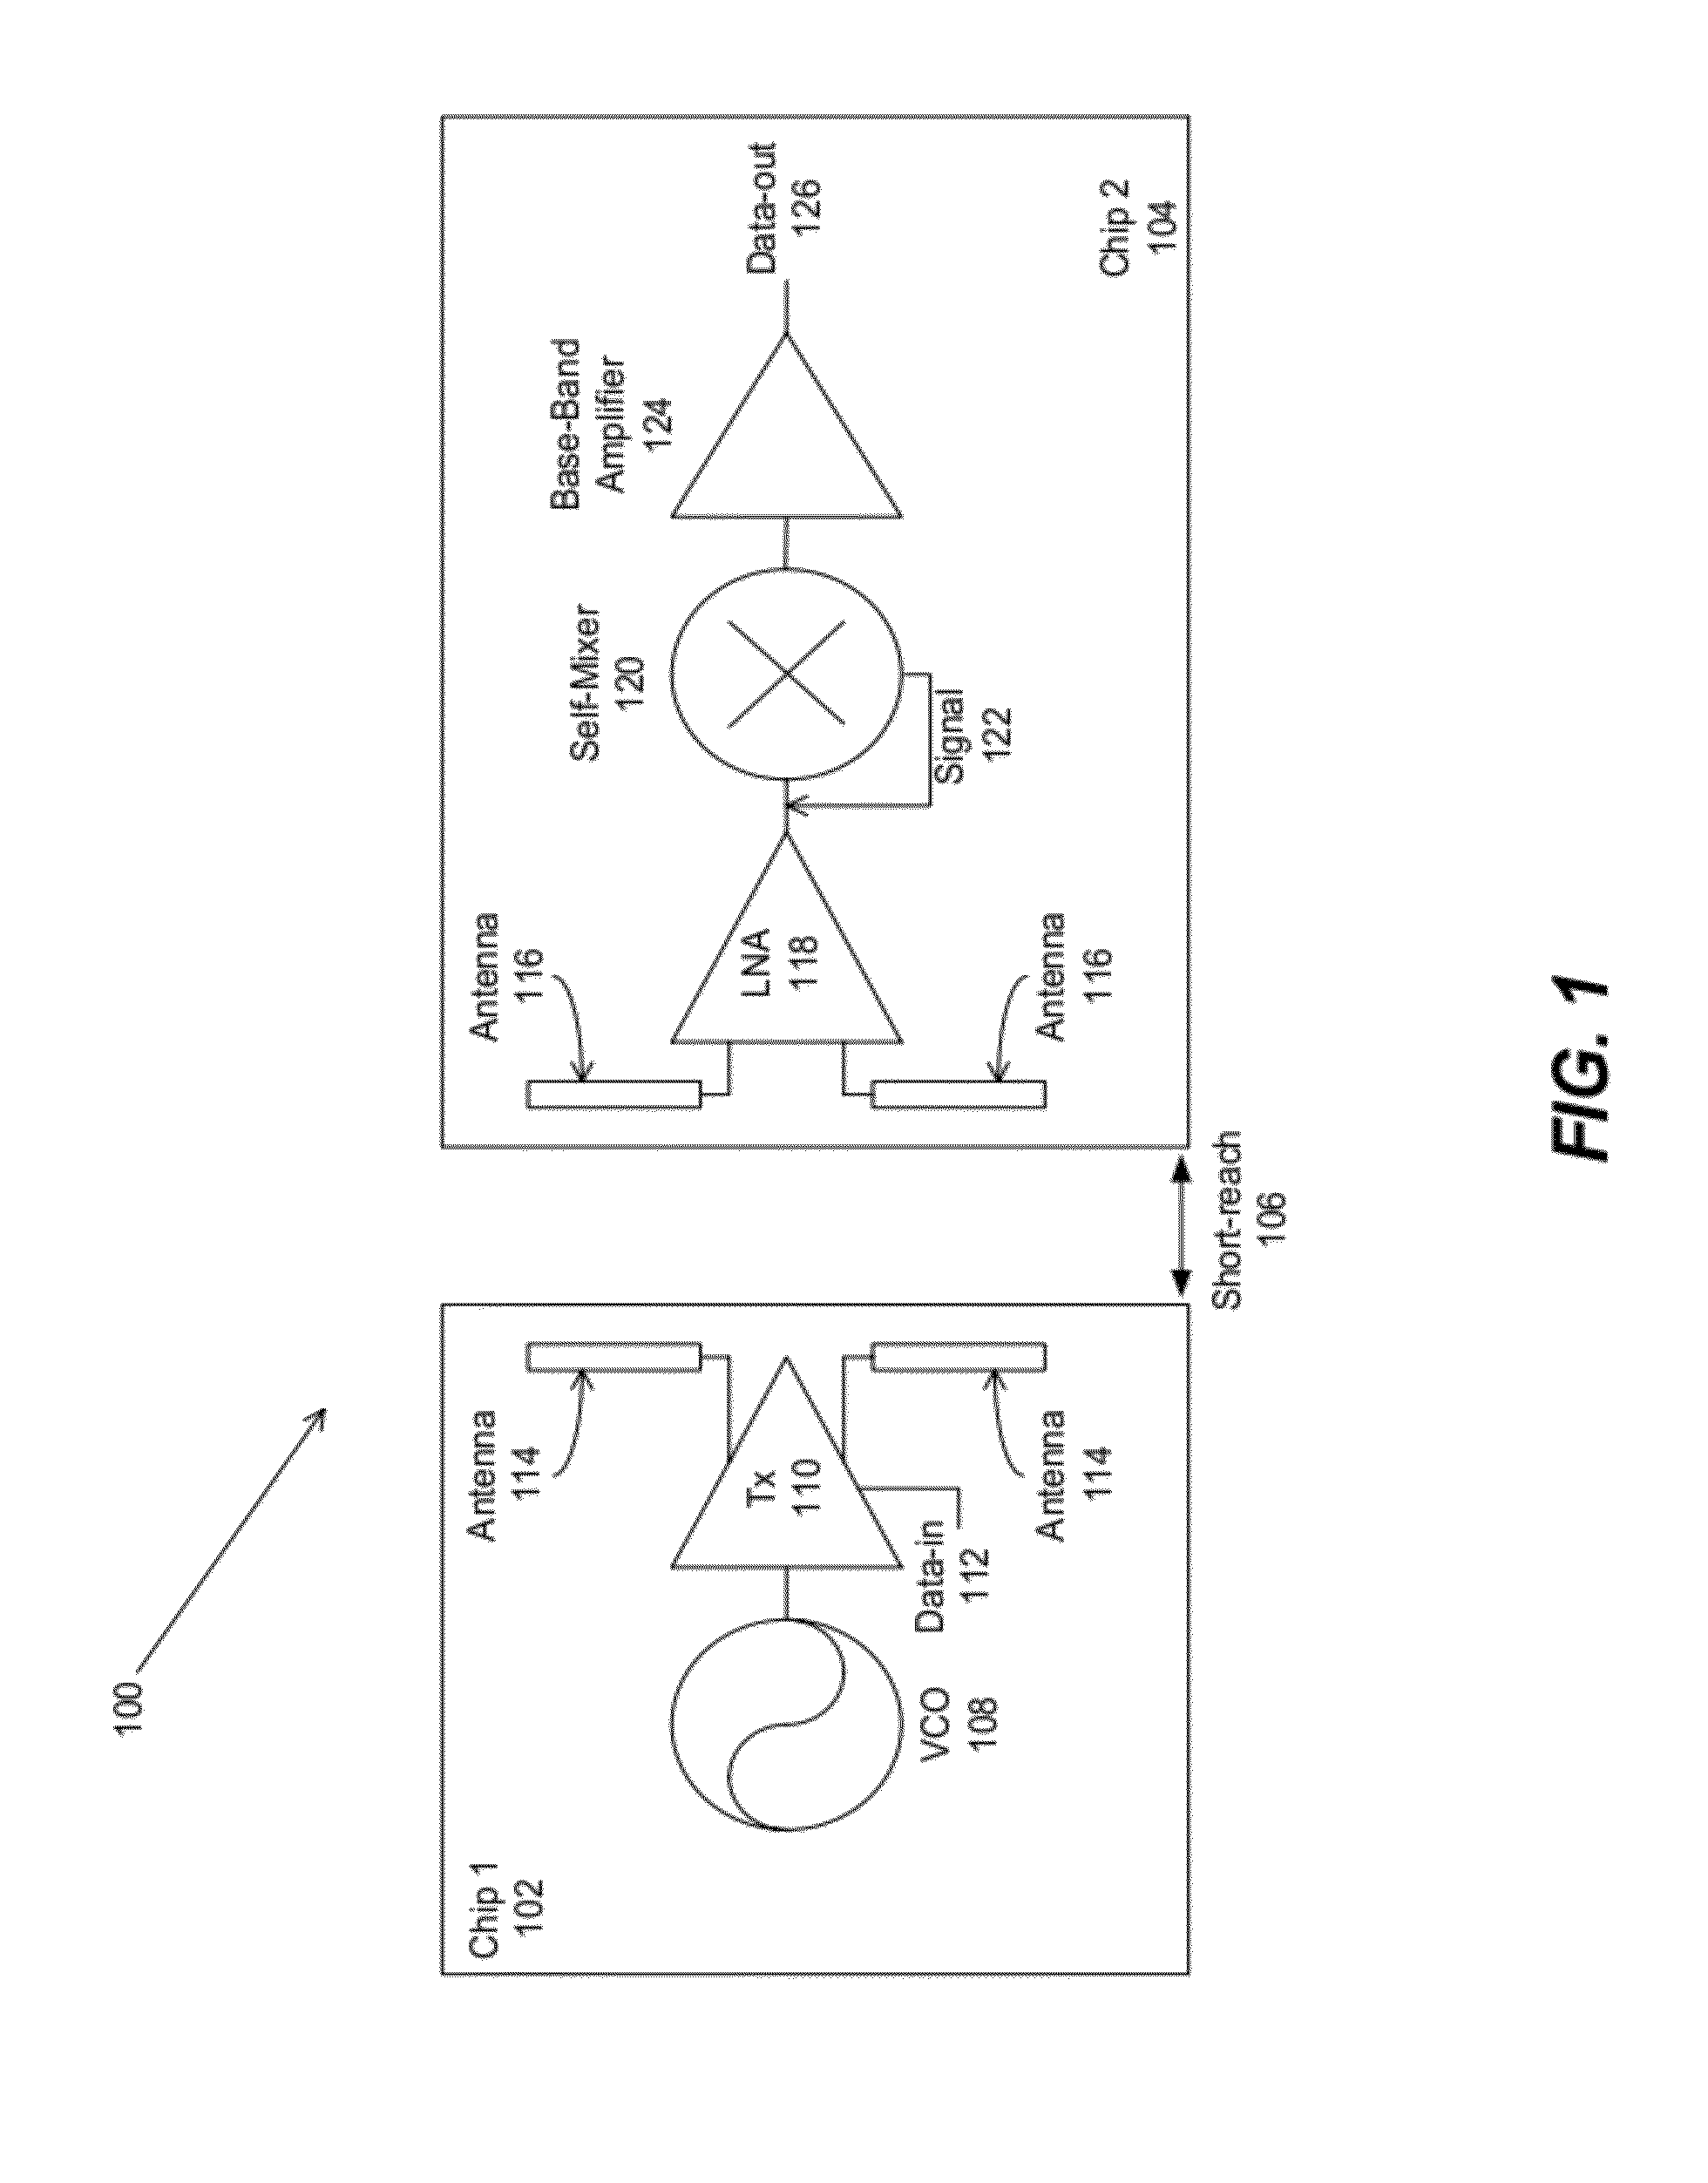 Milli-meter-wave-wireless-interconnect (m2w2 - interconnect) method for short-range communications with ultra-high data capability